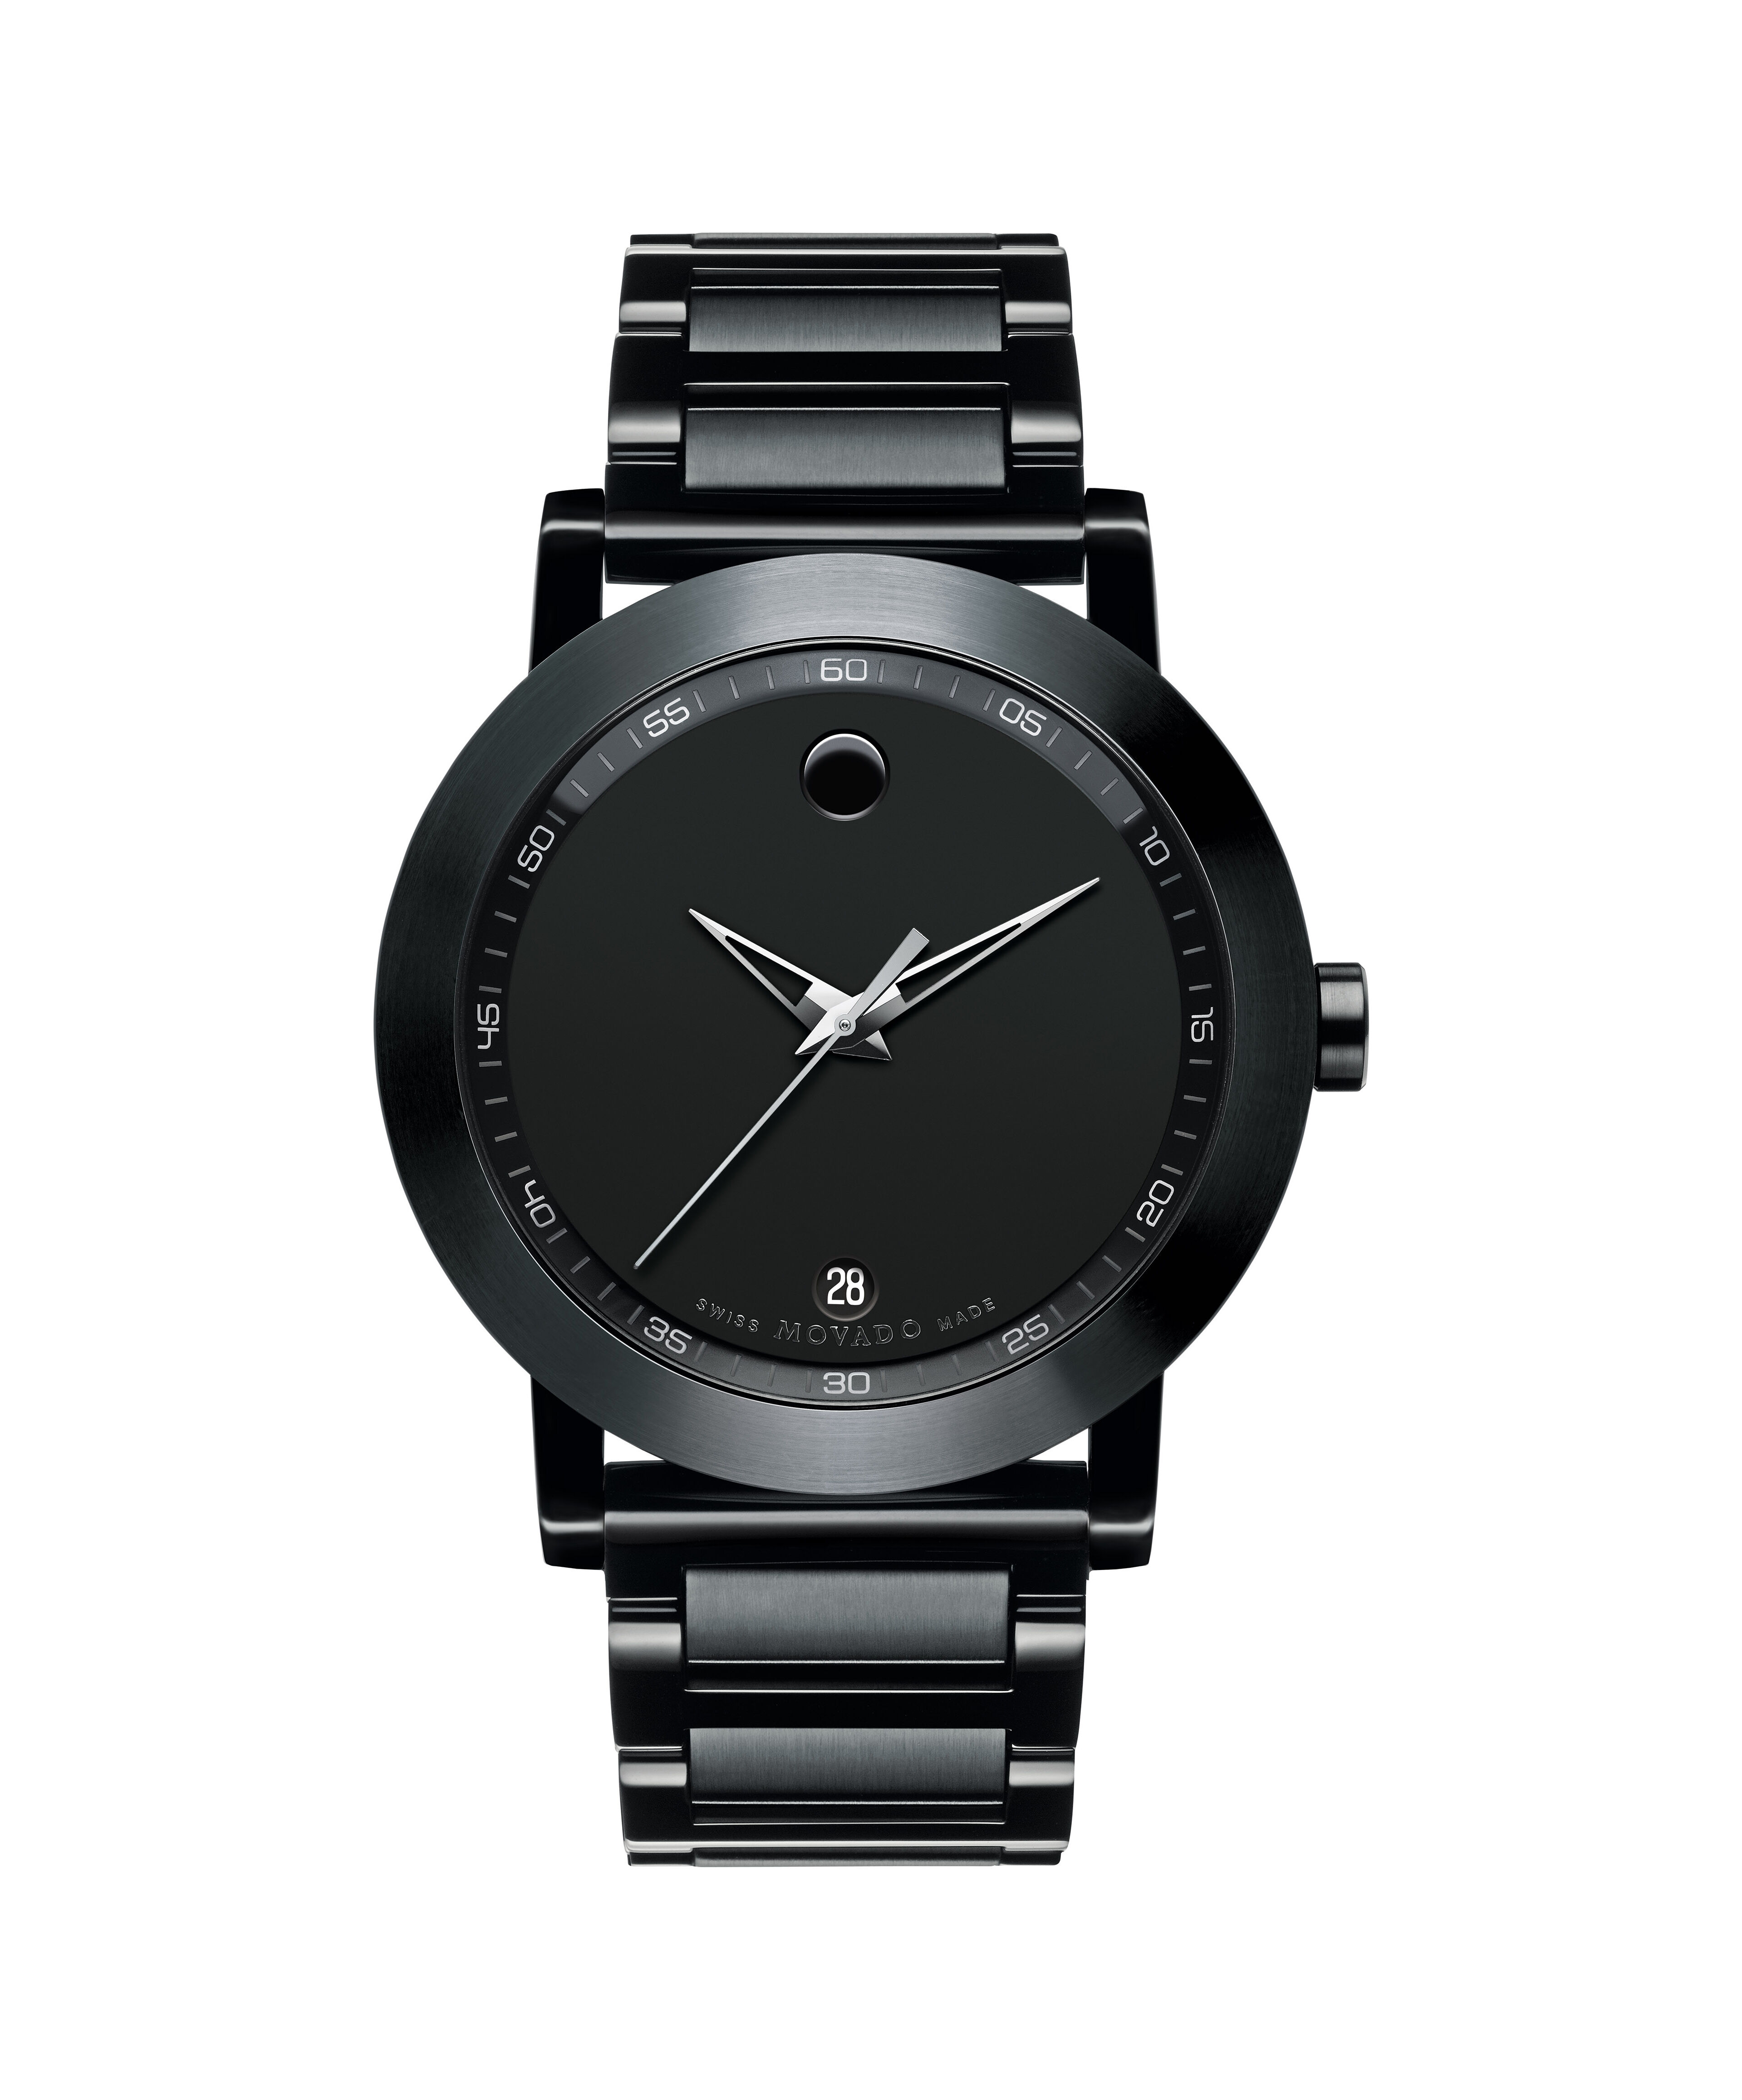 Do Inventory Adjusters Sell Fake Movado Watches